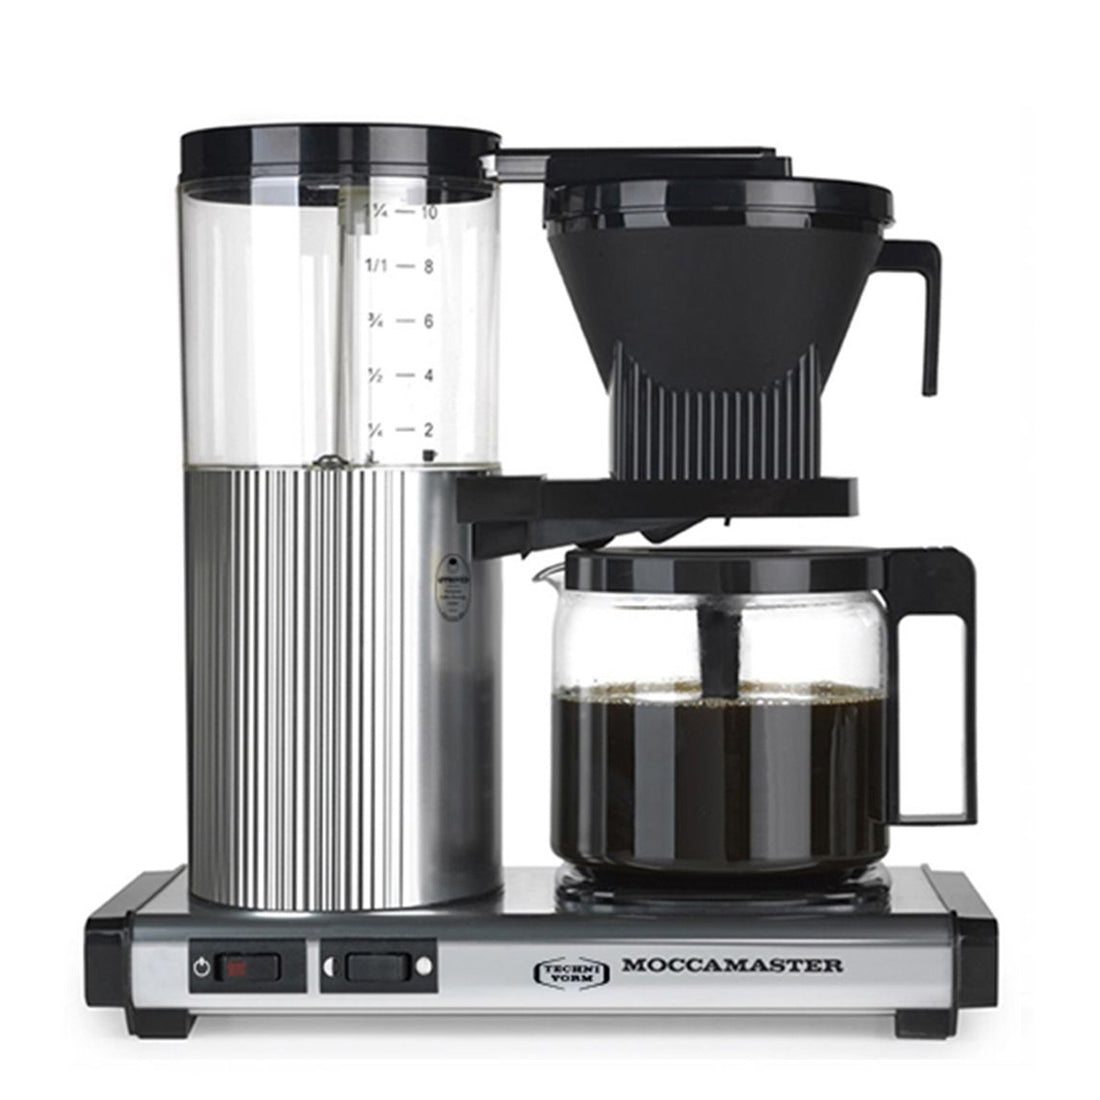 New lows hit the beloved Technivorm Moccamaster coffee makers from